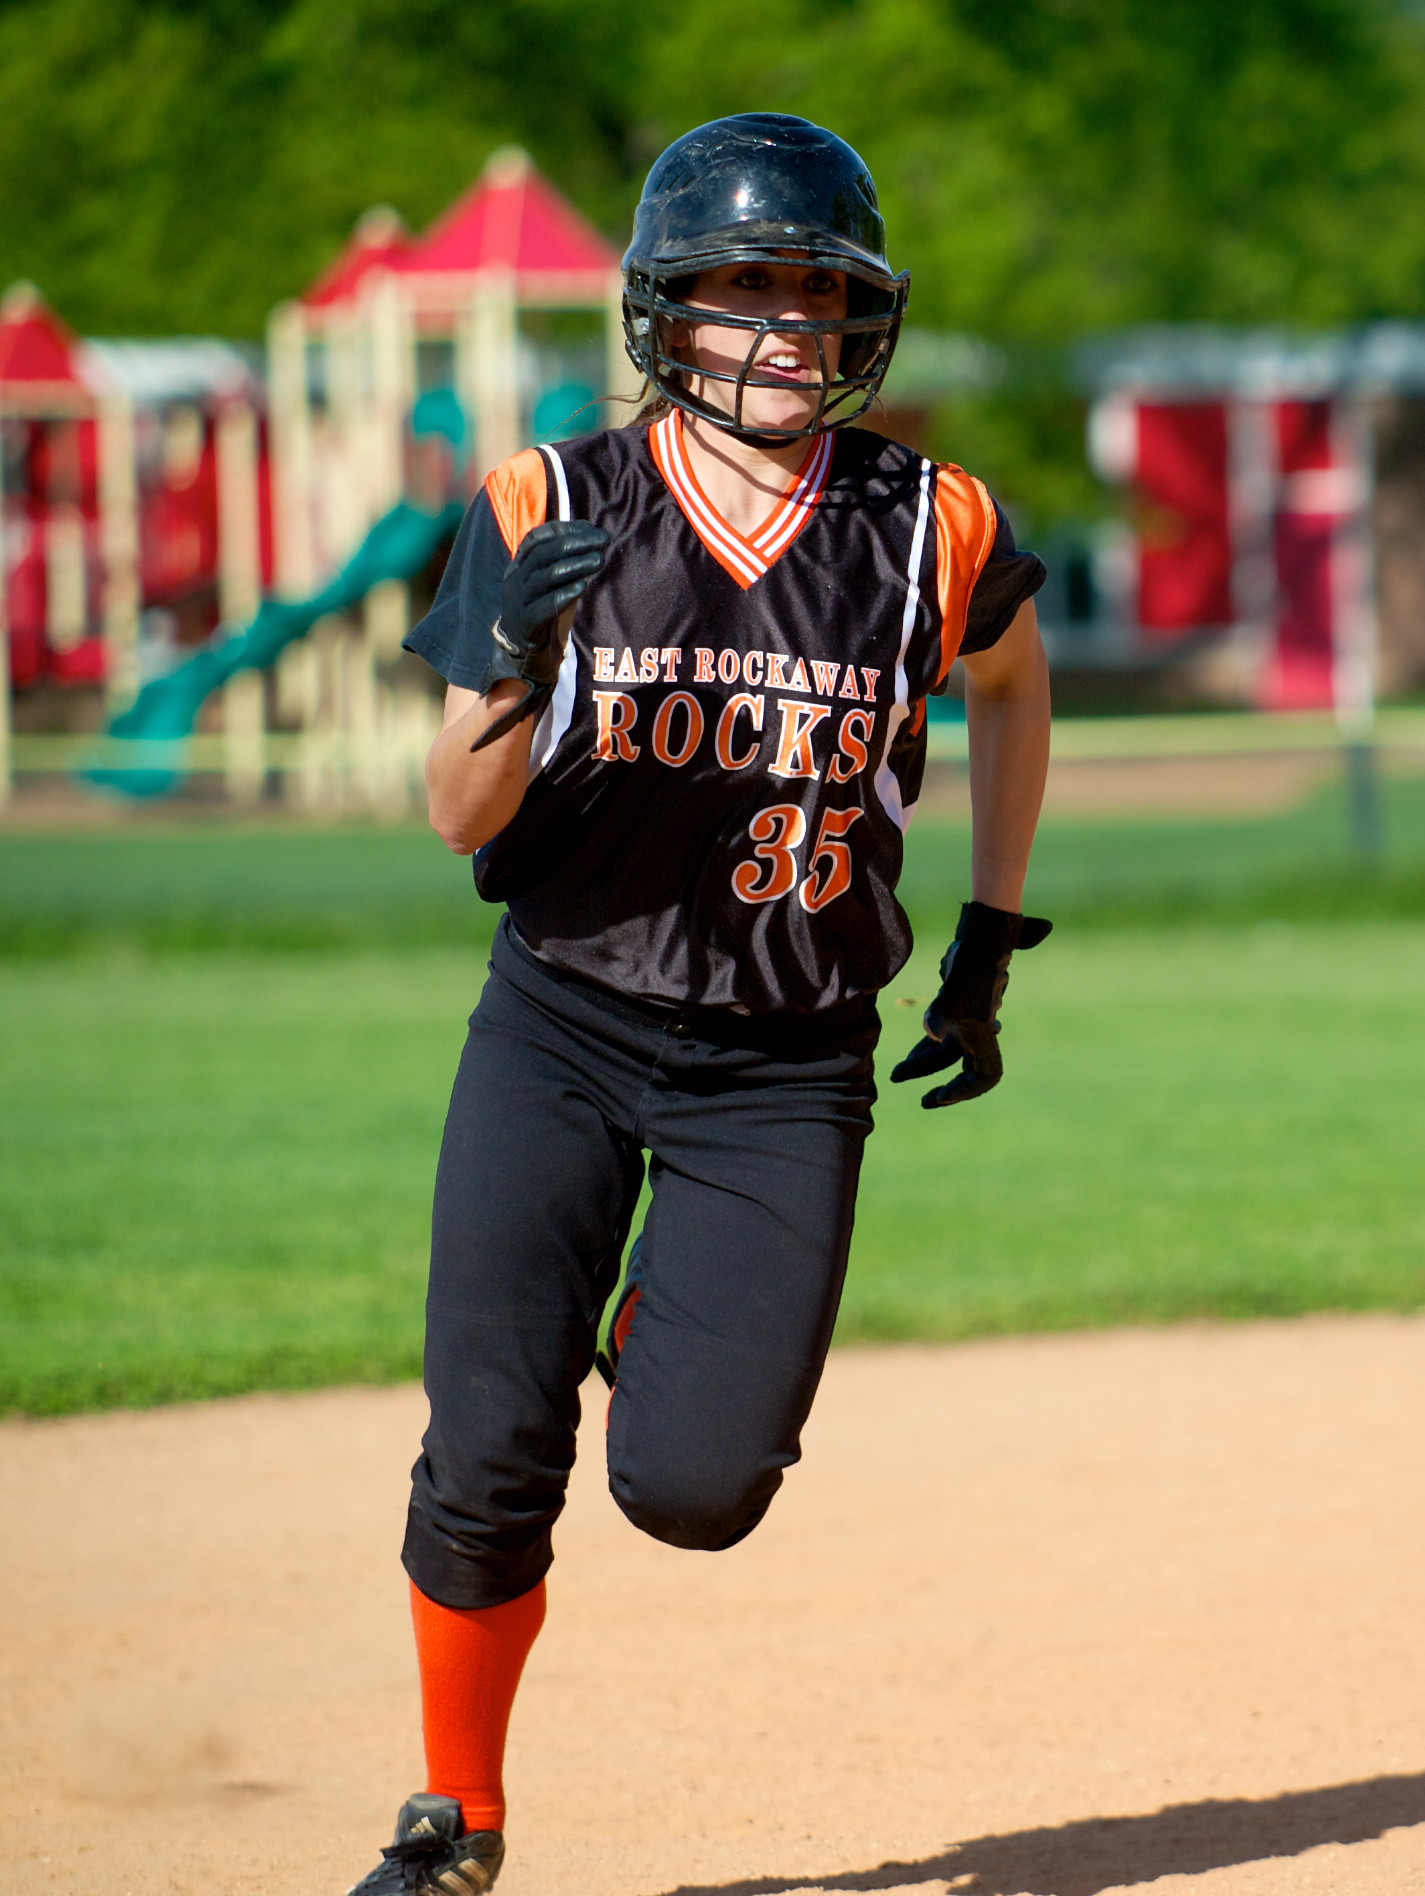 Samantha Mantovani scored the only run in Game 2 of East Rockaway's Class B best-of-three series win over Oyster Bay last week.